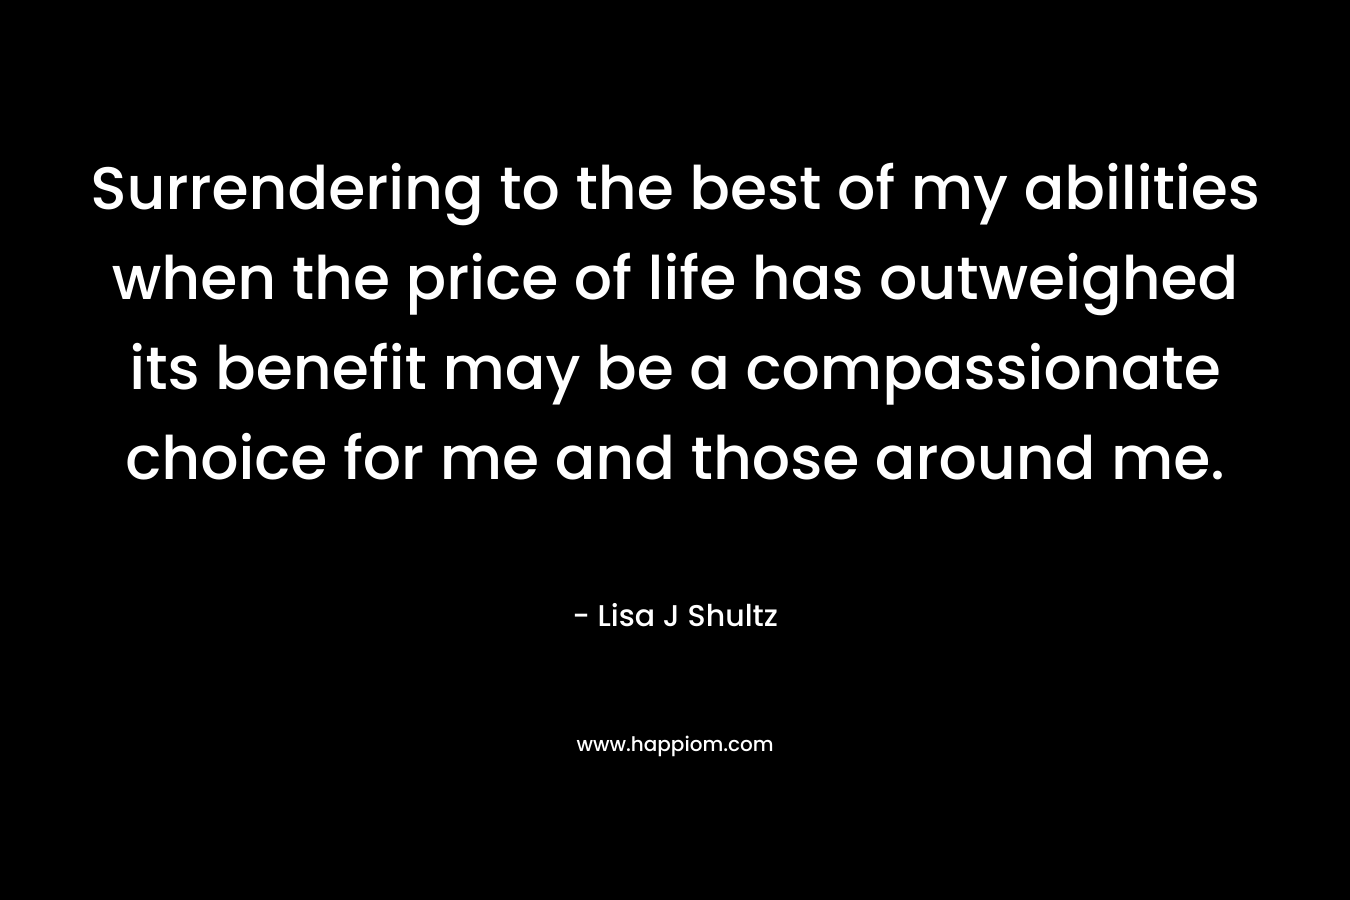 Surrendering to the best of my abilities when the price of life has outweighed its benefit may be a compassionate choice for me and those around me. – Lisa J Shultz